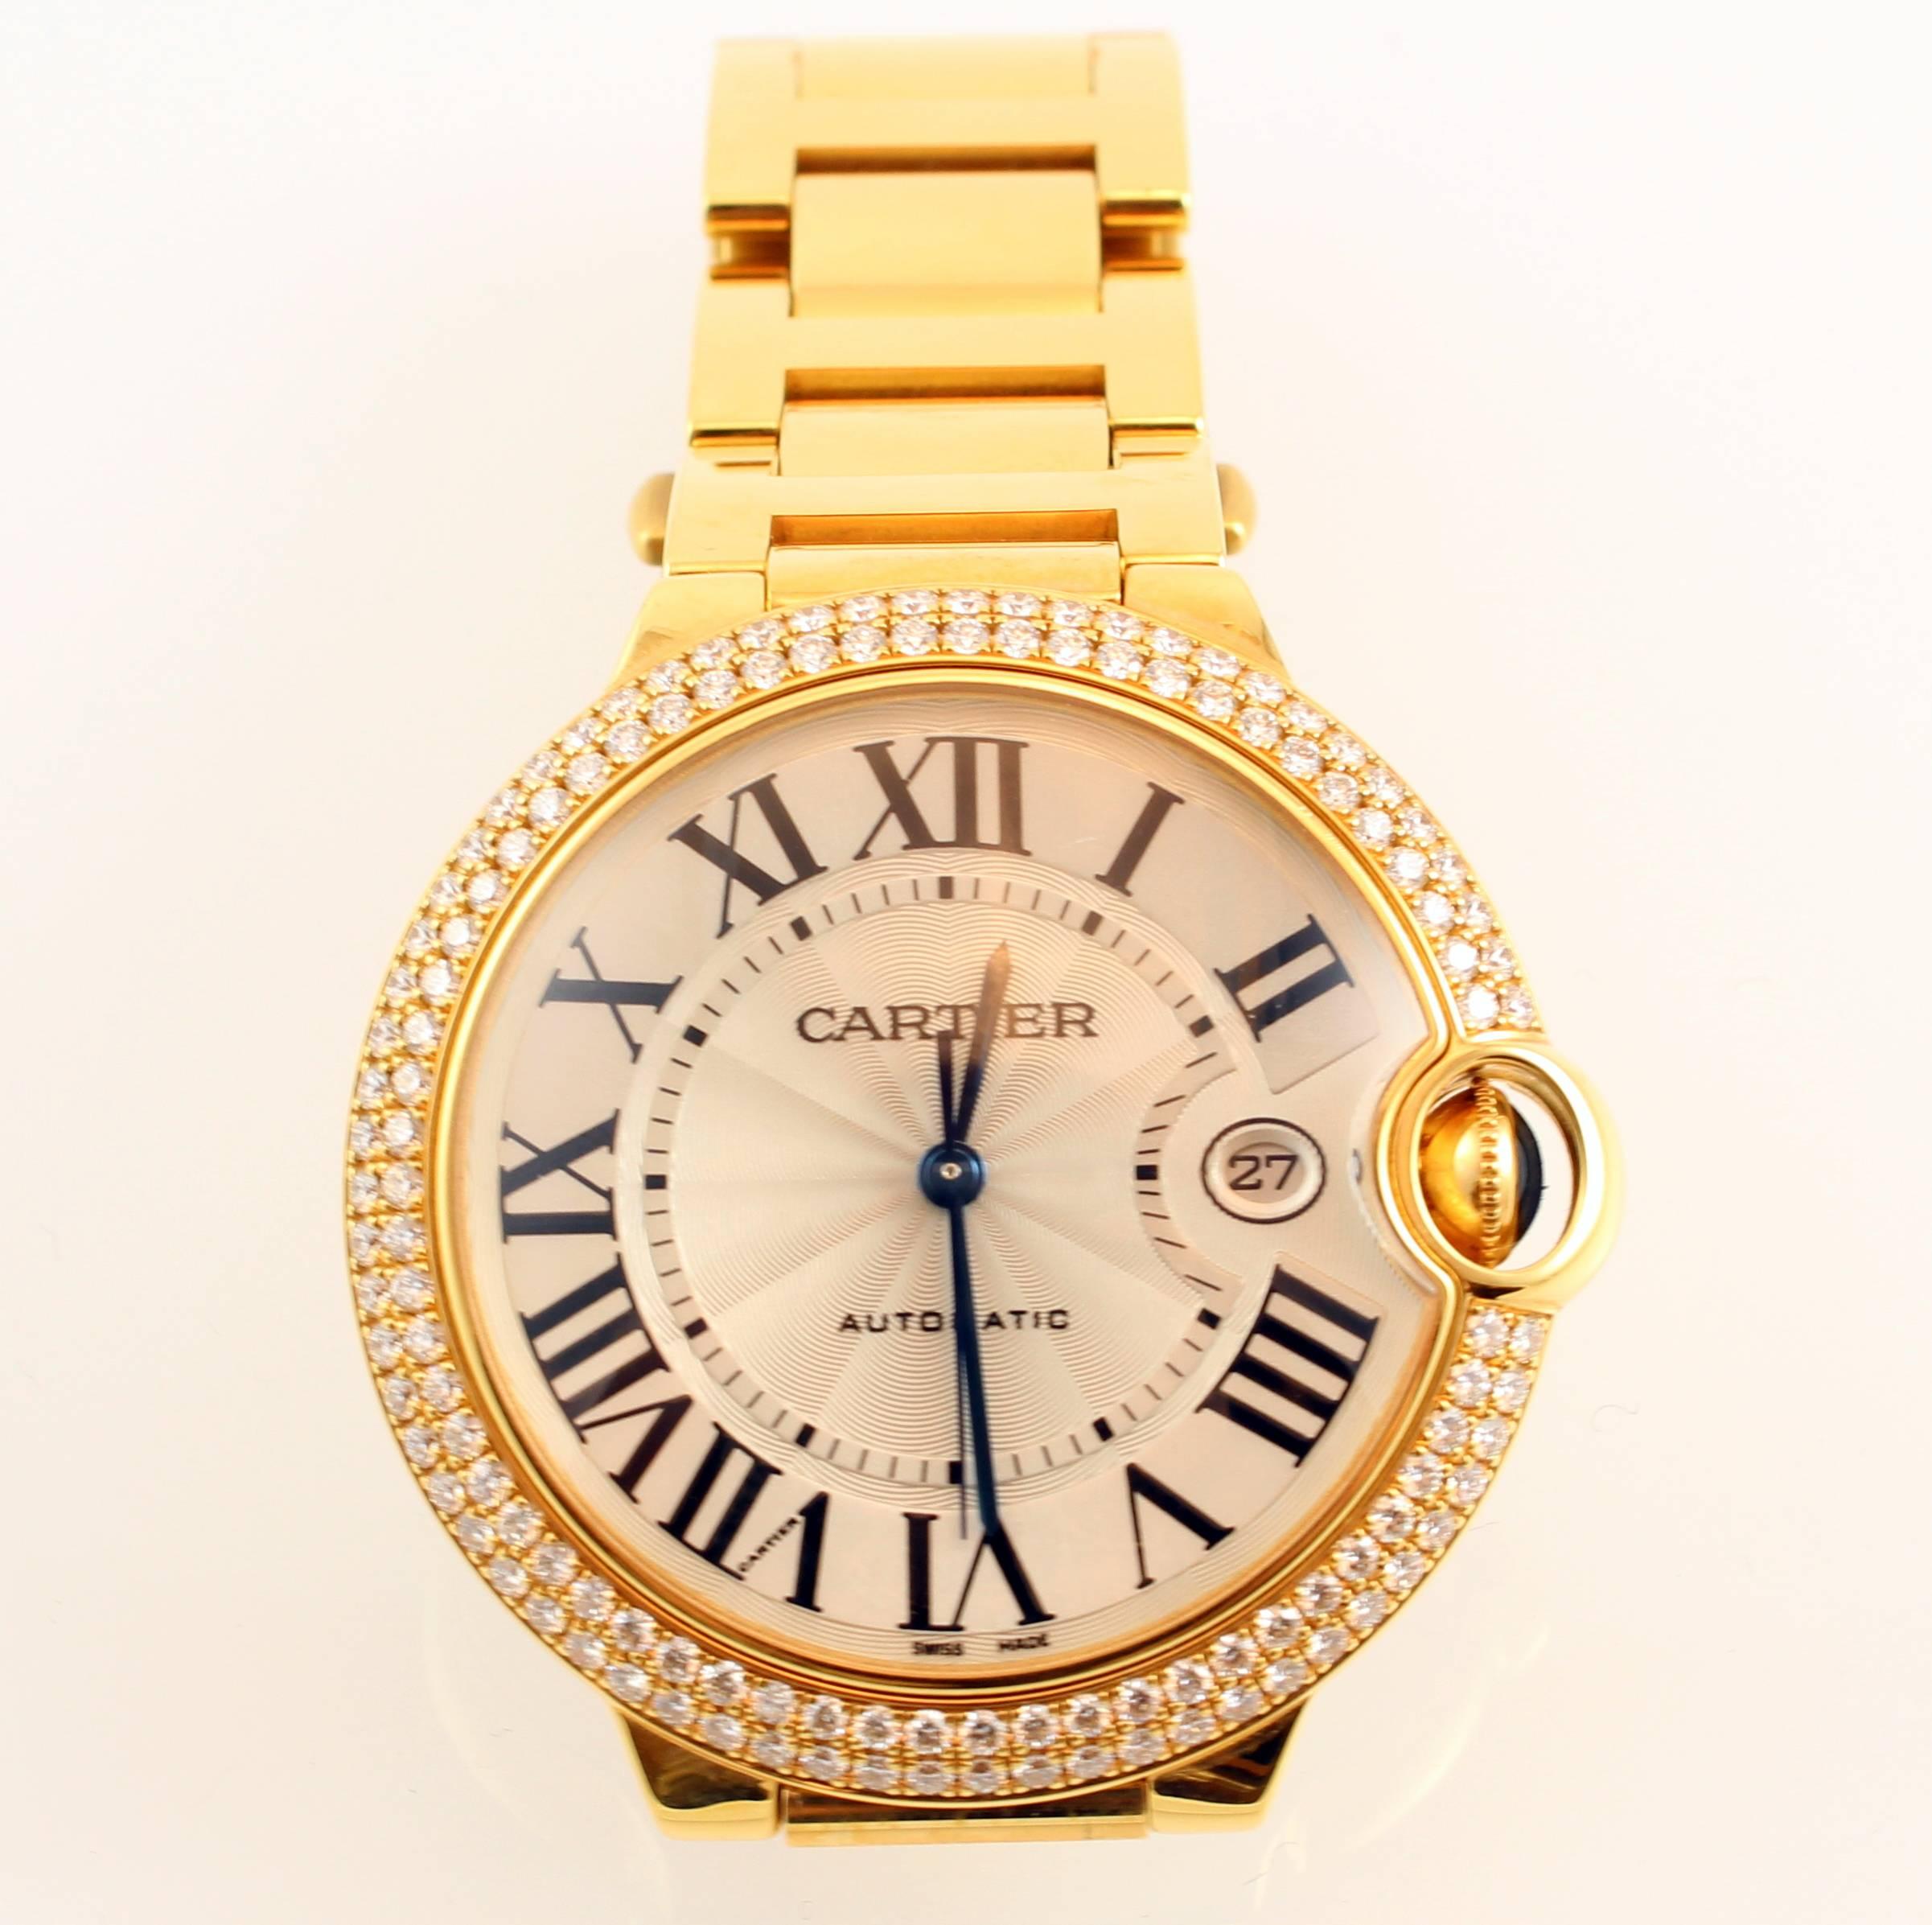 New 18K yellow gold diamond Ballon Bleu De Cartier bracelet watch, large, automatic movement, double row paved bezel, silvered opaline dial, guilloche and lacquered, blued steel sword-shaped hands, Roman numerals, date window, yellow gold bracelet.